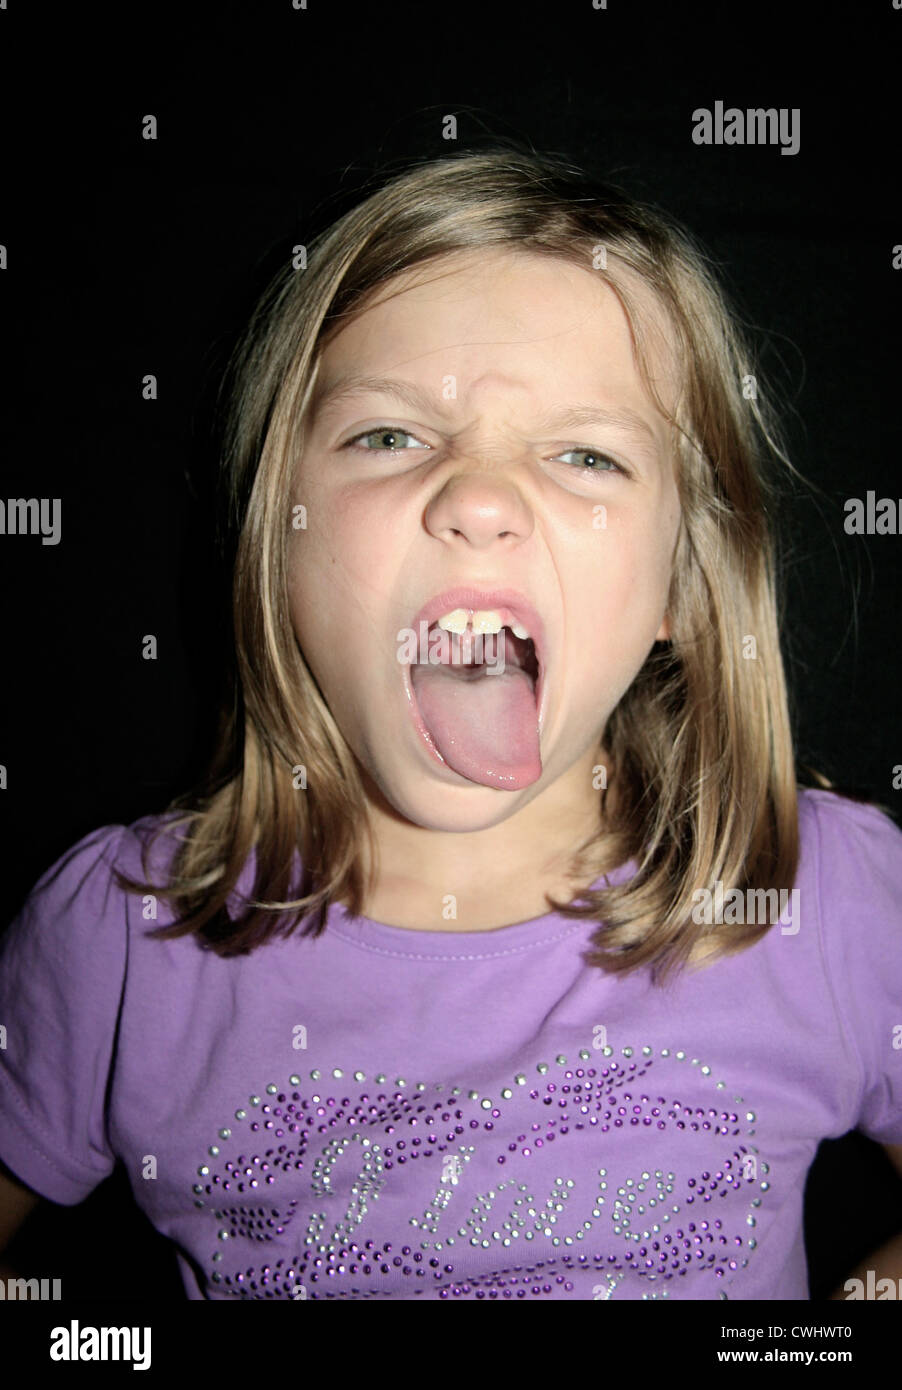 girl,naughty,sticking out tongue,grimace Stock Photo